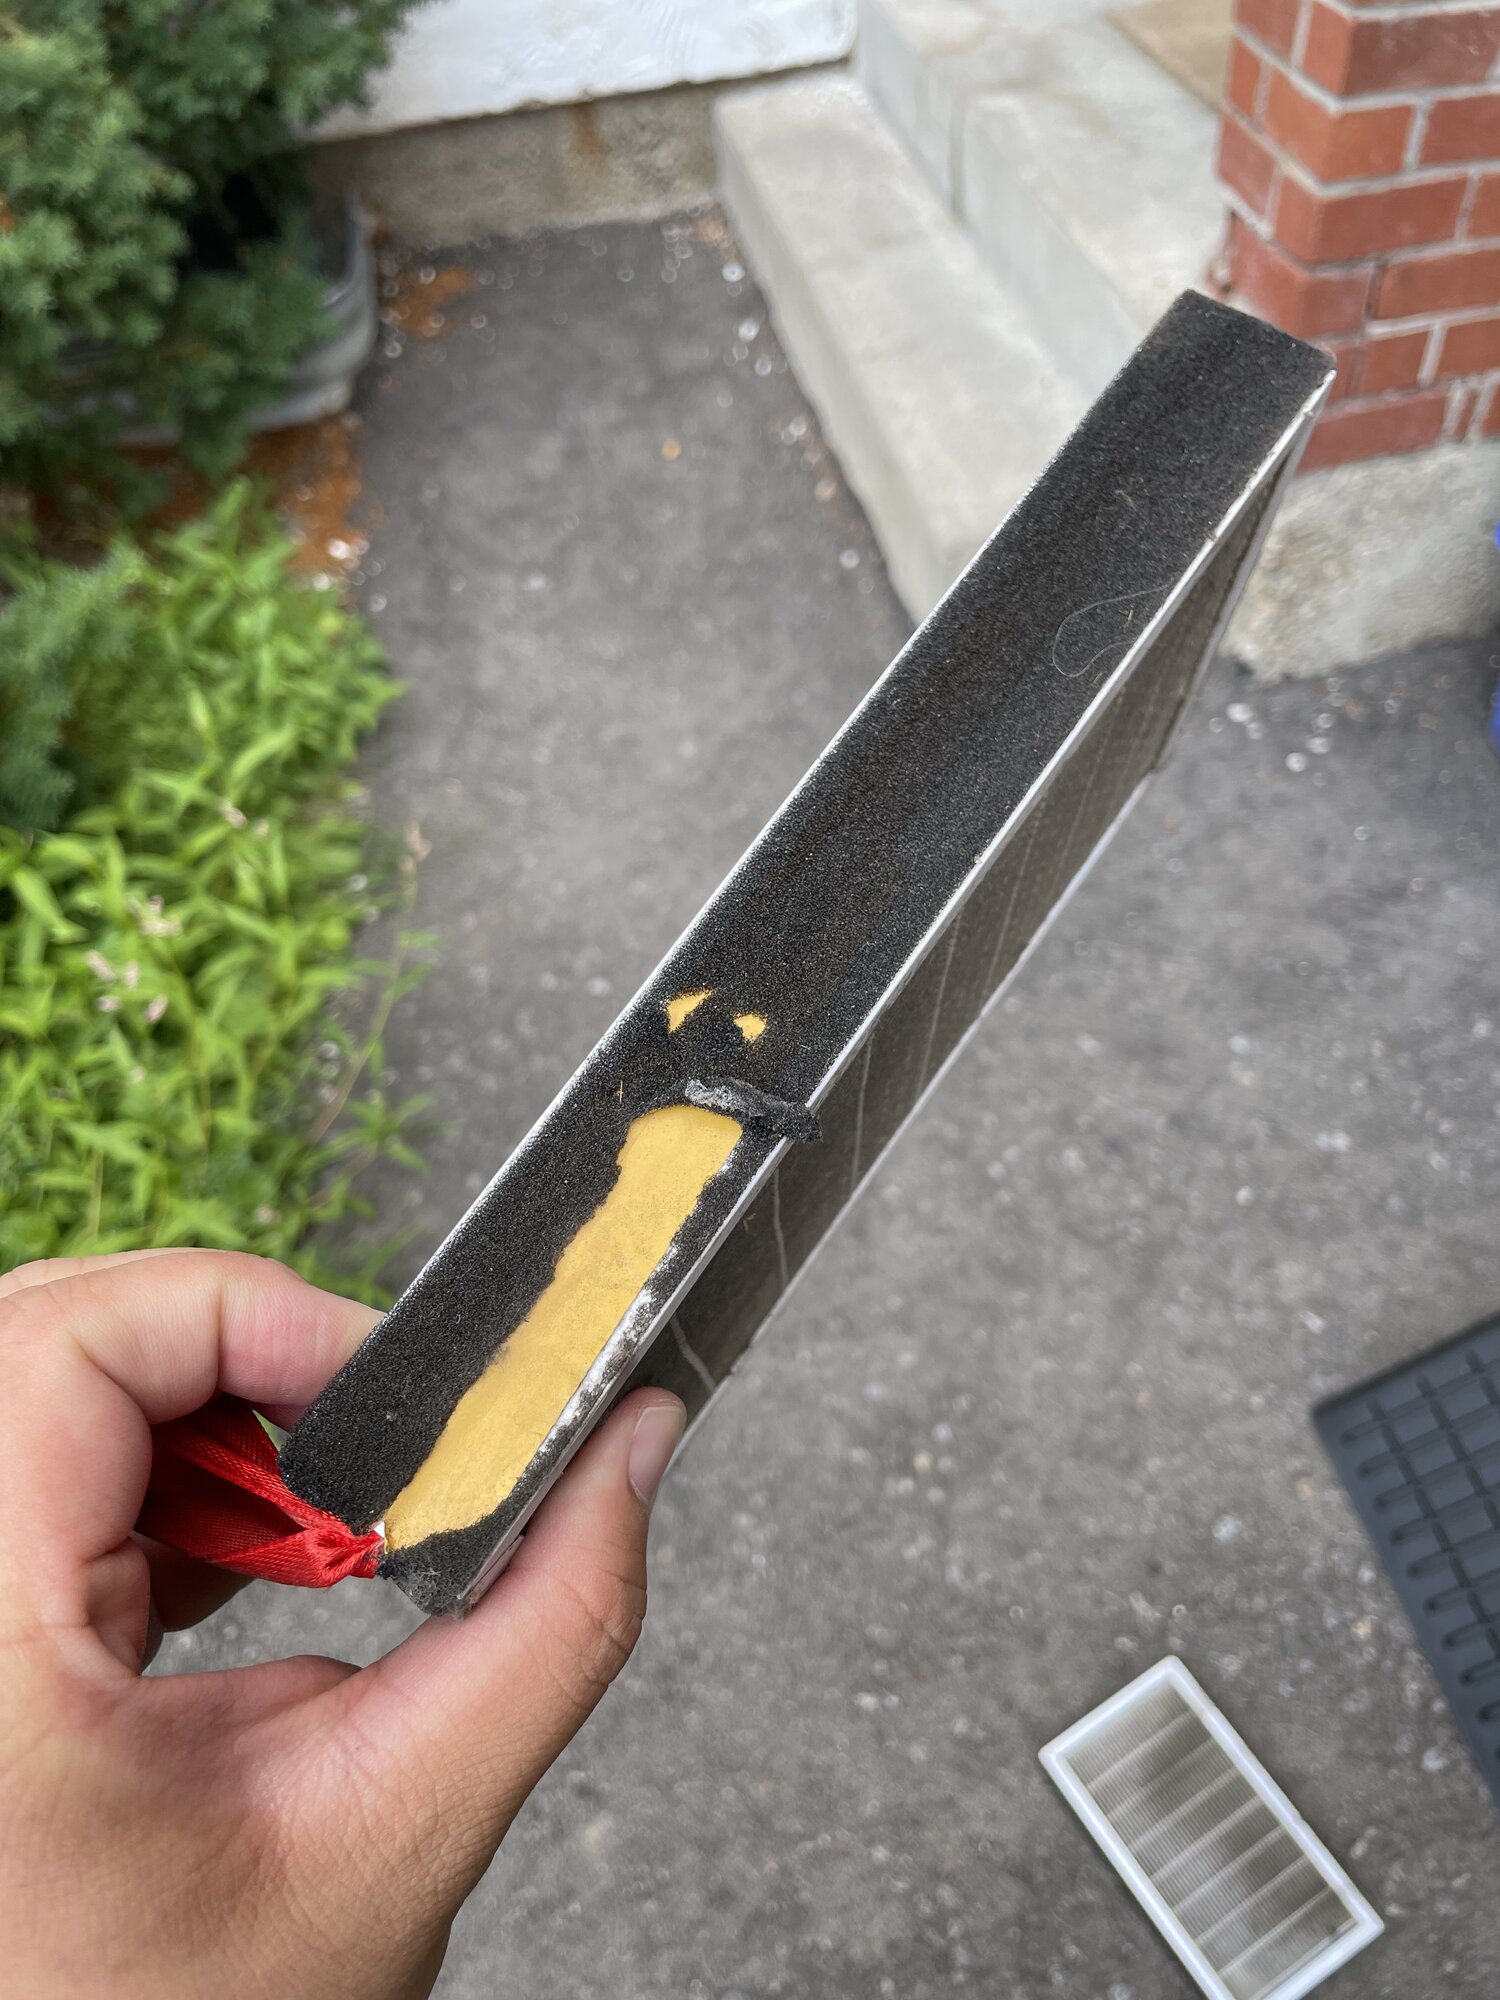 Do Not Buy “HEPA” Cabin Air Filters for Model 3